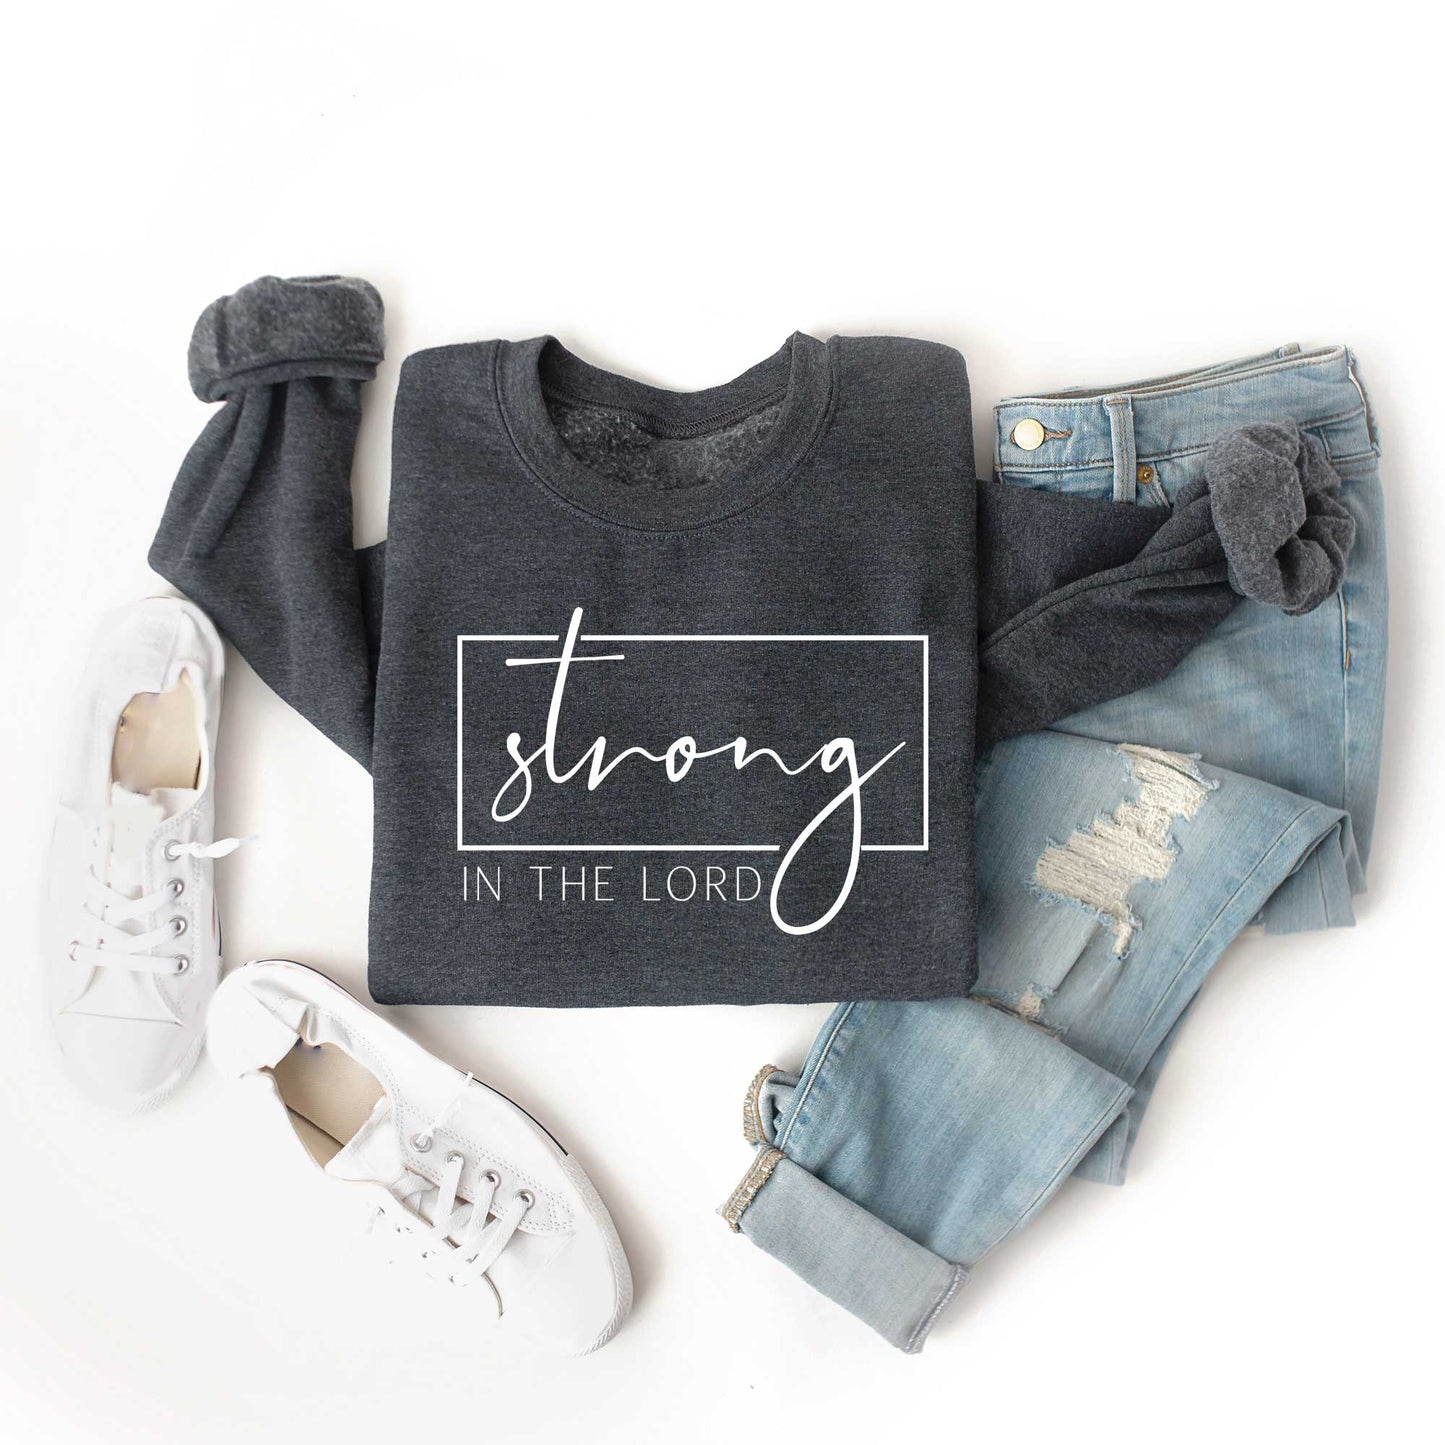 Strong In The Lord | Sweatshirt